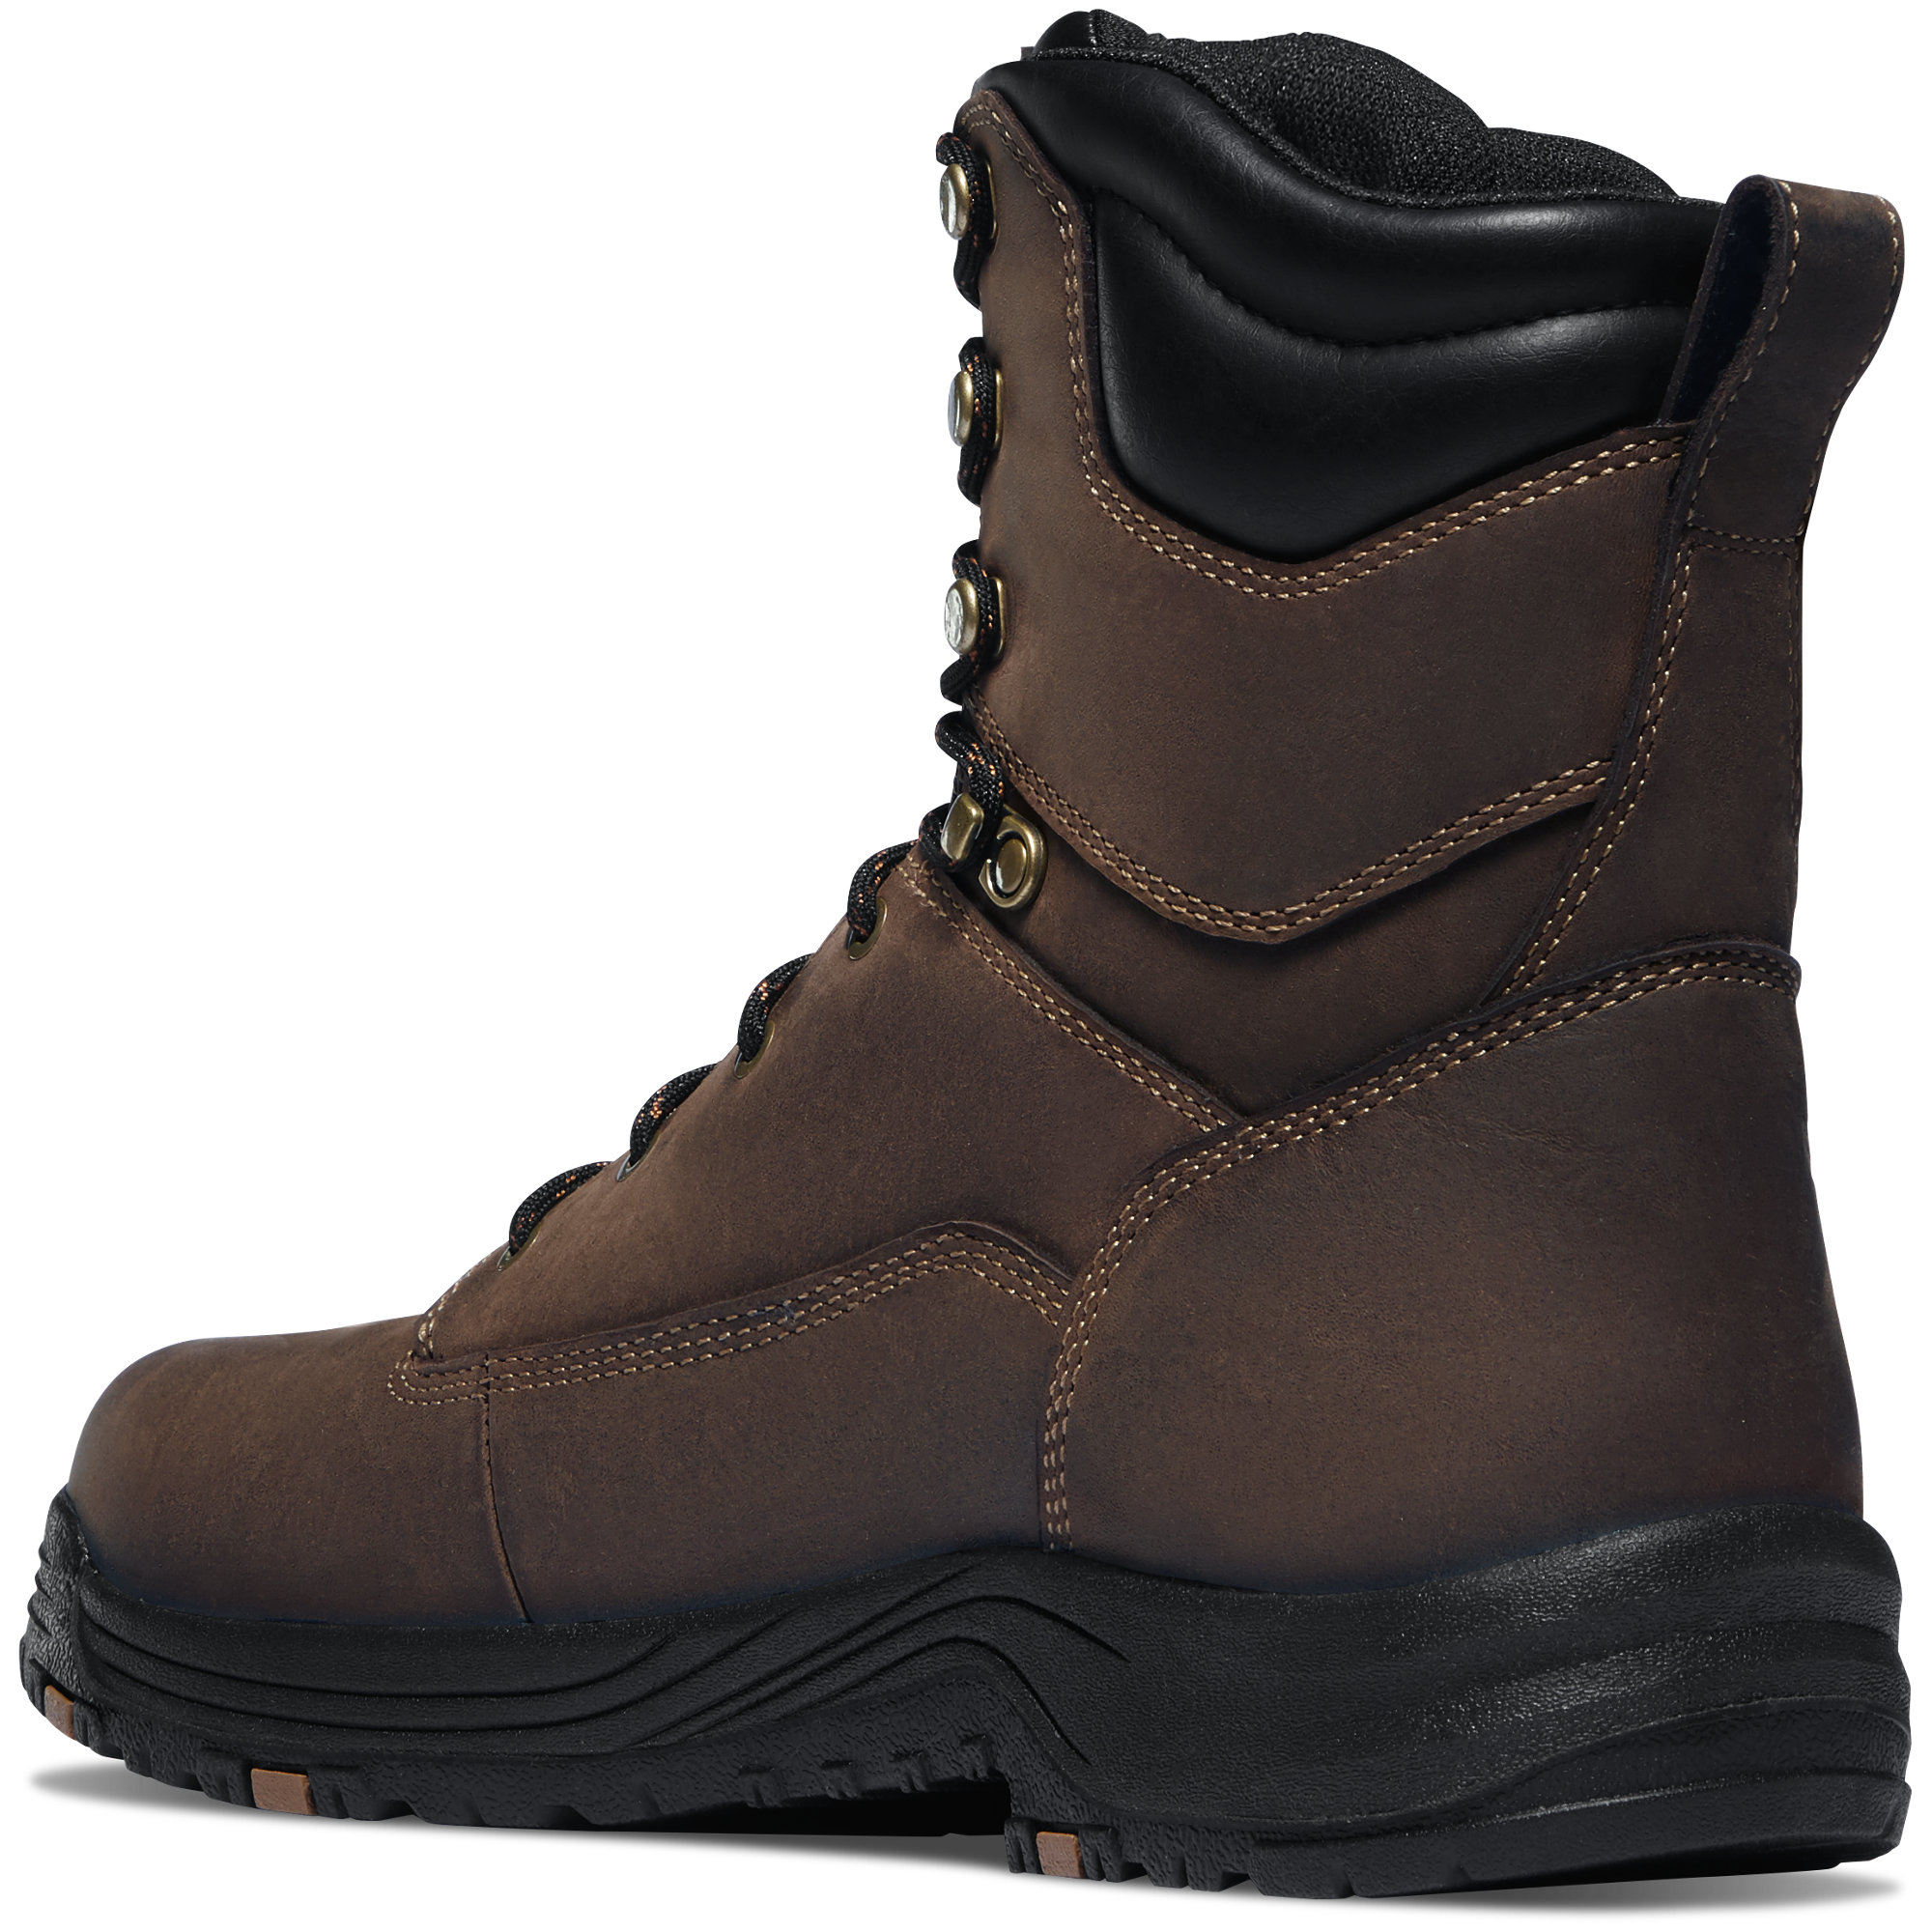 Danner Men's 8-Inch Caliper Aluminum Toe Boots from Columbia Safety